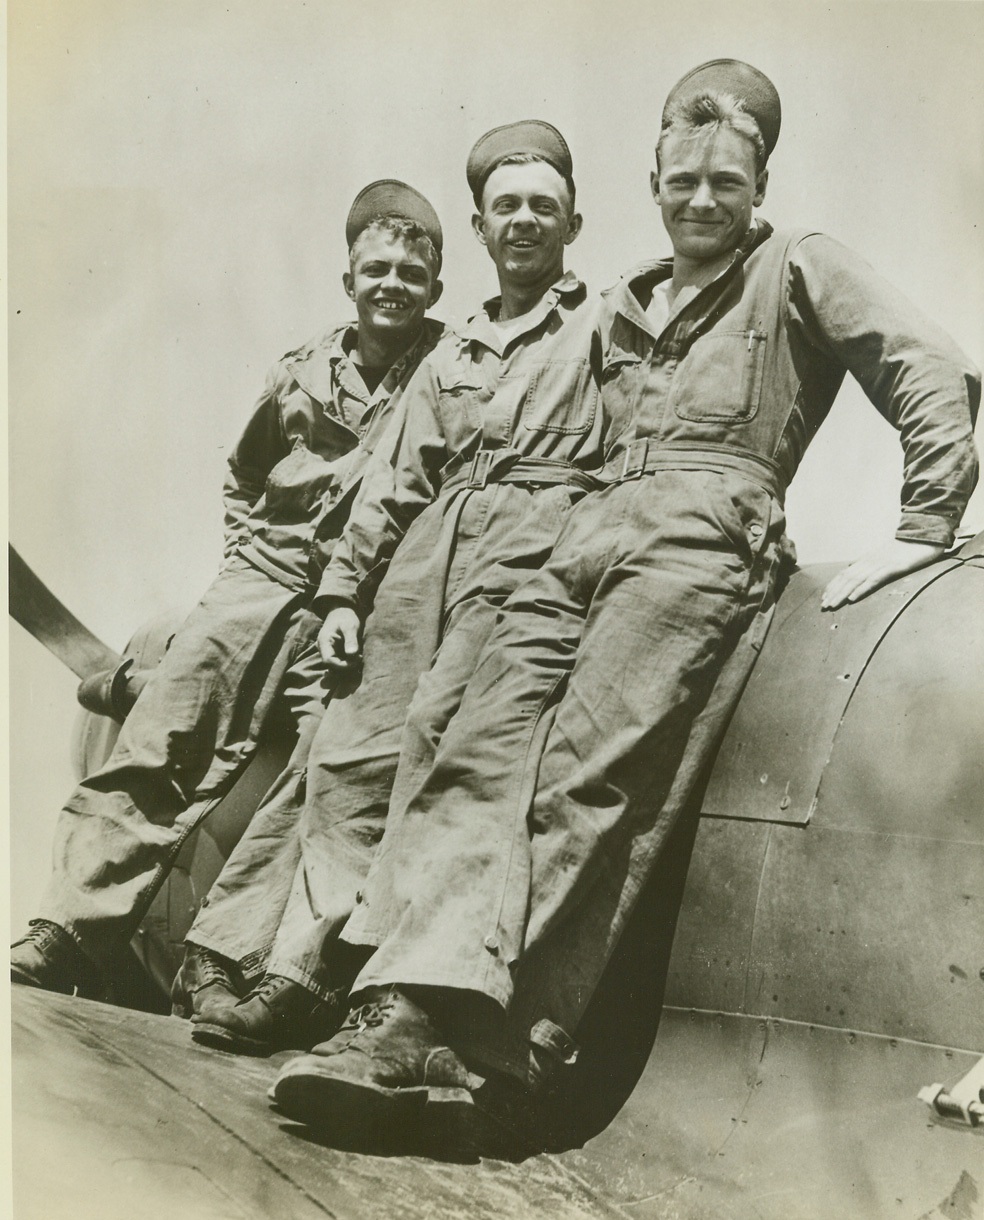 ”AMERICANS ARE CONFIDENT—”, 8/5/1942. SOUTHERN ENGLAND – With smiles of confidence in ultimate victory, these young American members of a U.S. Army Air Force ground crew at a station in southern England pose for the photographer. It’s upon the willingness and capability of “greasemonkeys” like these that the success of any Air Force venture depends. They are (left to right): Don Walker, of Washington, Iowa; Mallie Galloway, of Darlington, S.C.; and John Perkins, of Woodruff, Wisconsin. (Passed by censors). Credit: ACME;